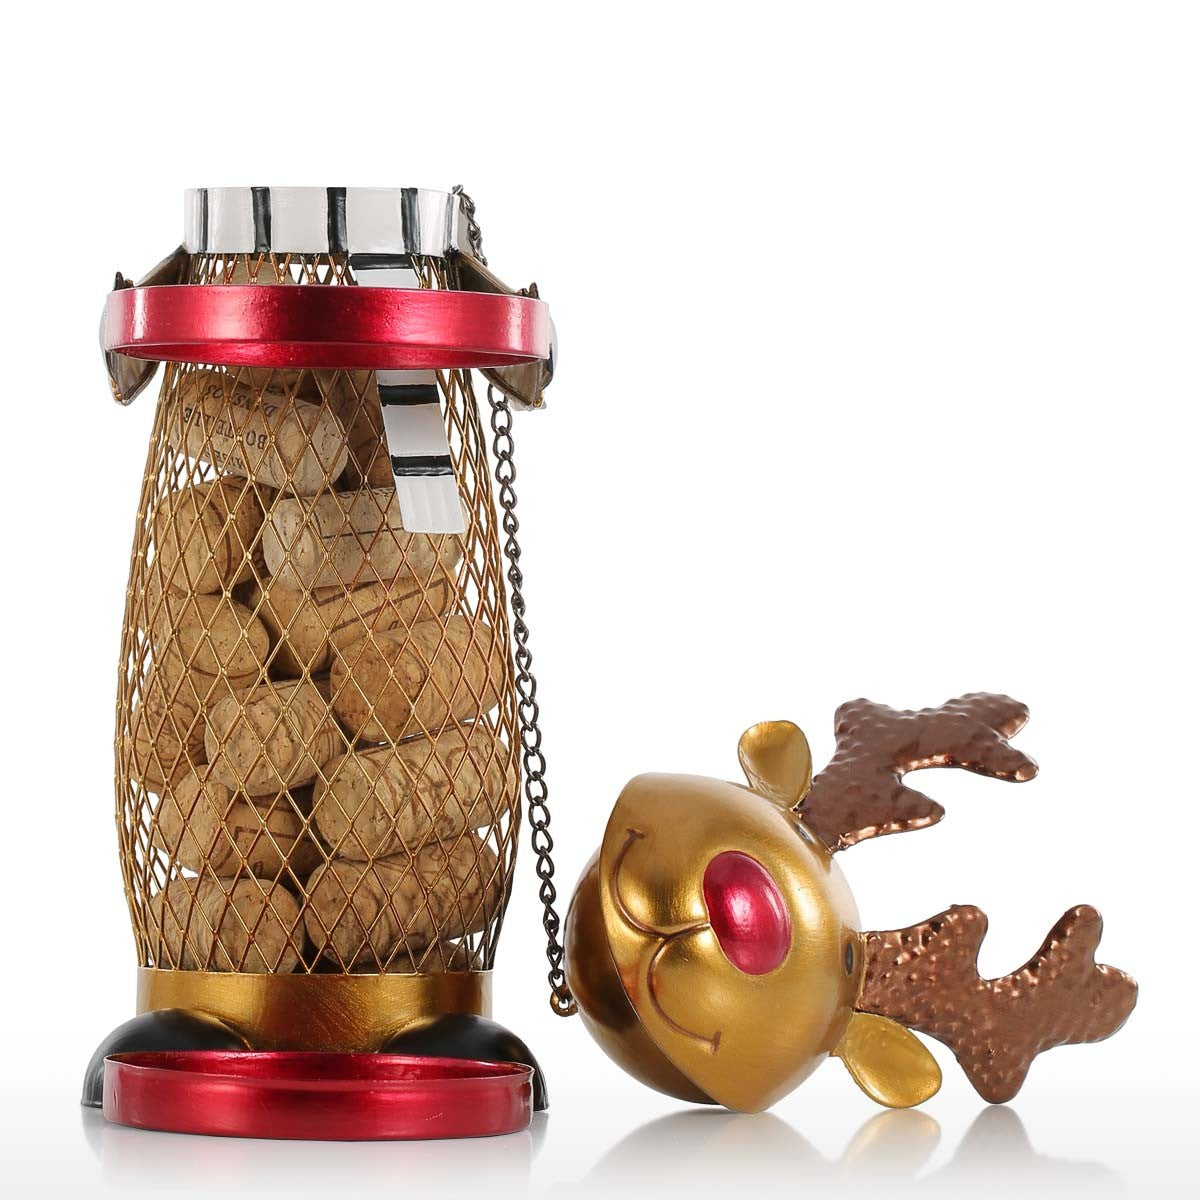 Reindeer wine bottle holder is the cutest item to for the holidays